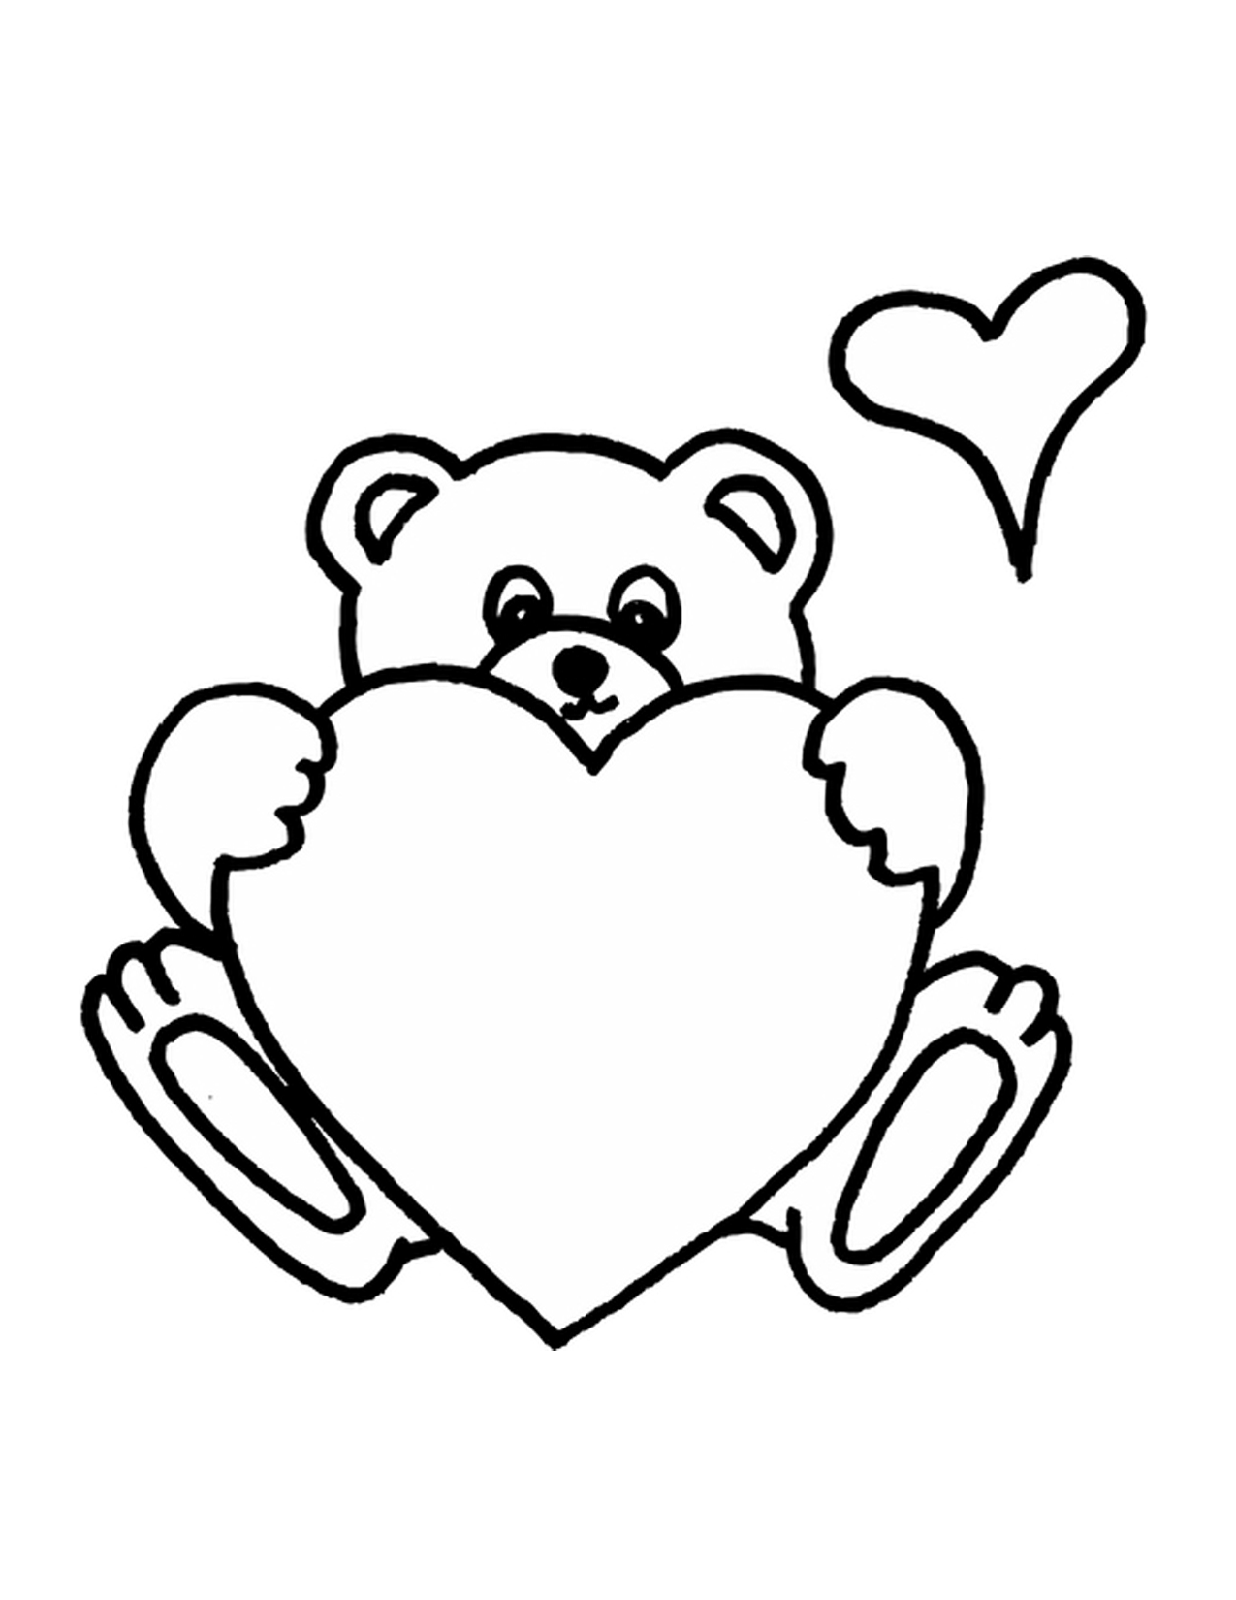 Heart teddy bear coloring pages to print educative printable heart coloring pages teddy bear coloring pages love coloring pages